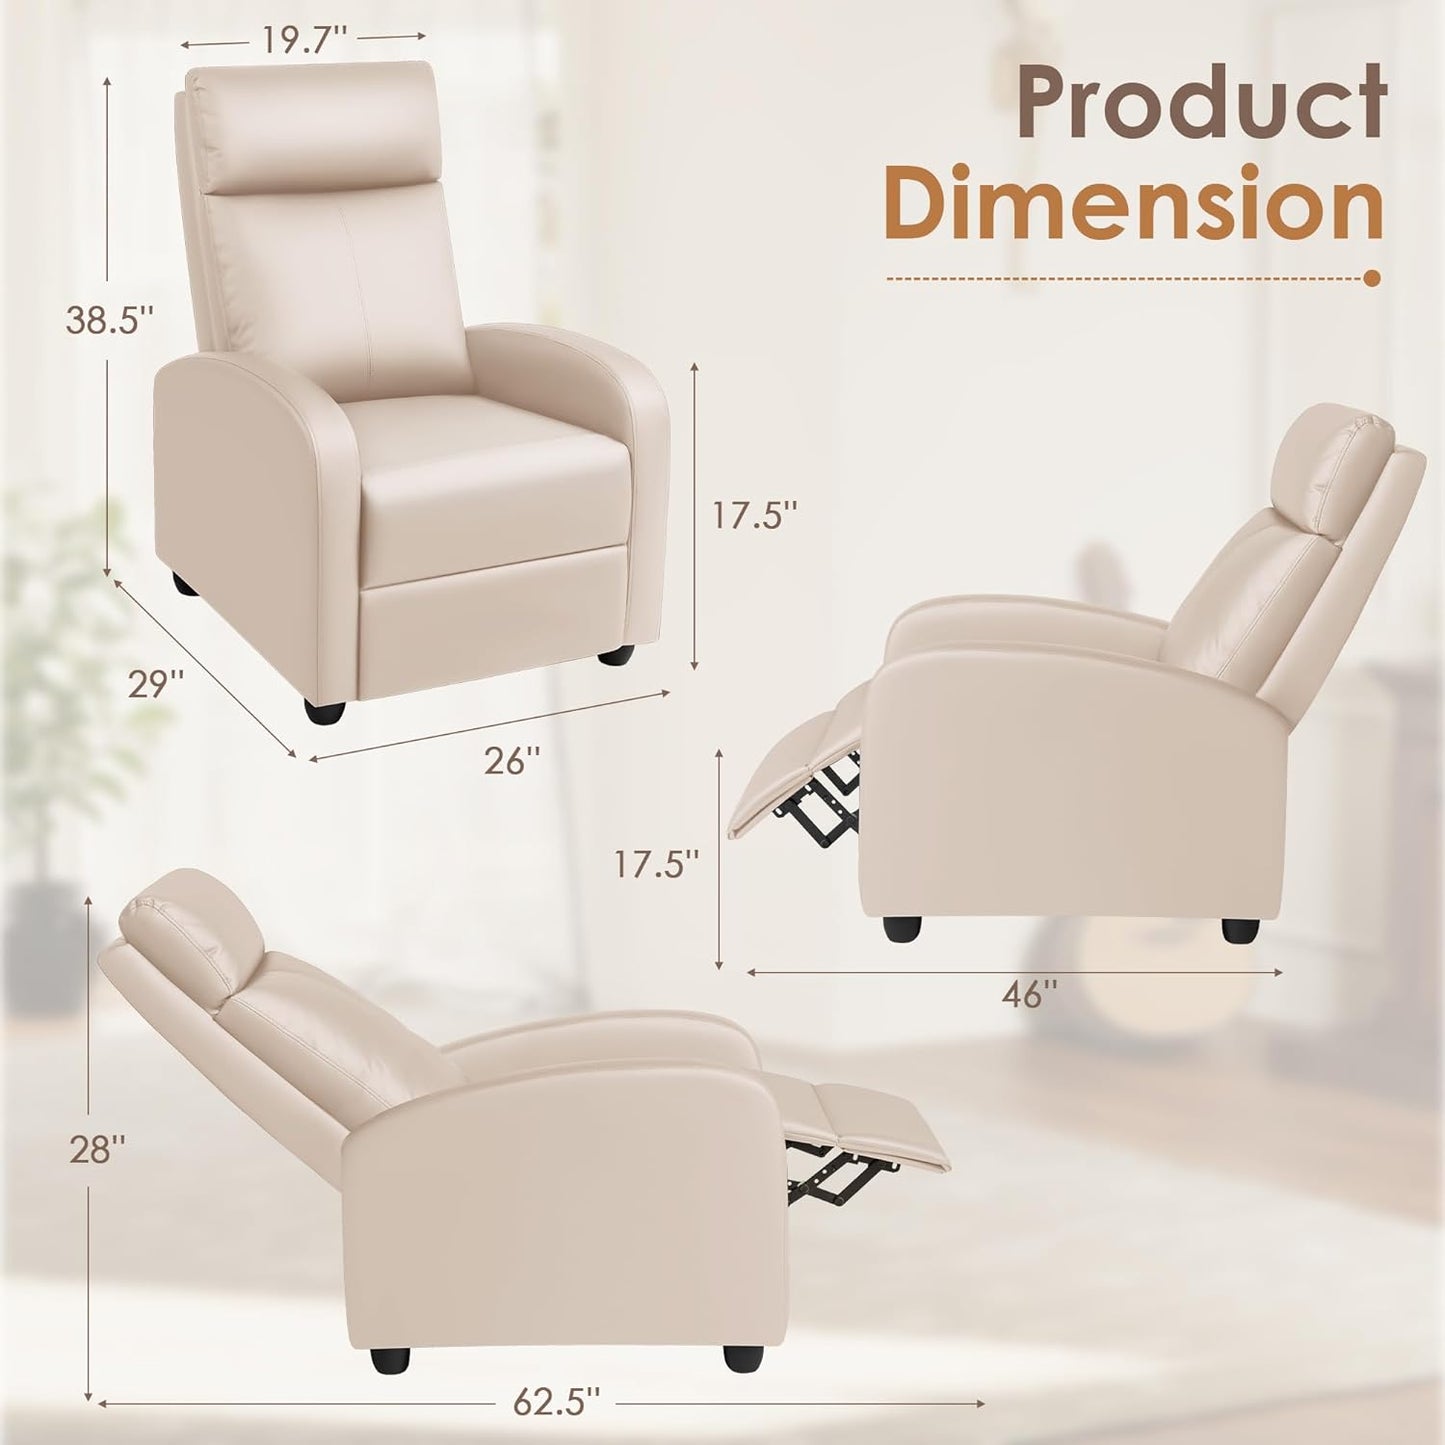 Rankok Recliner Chair Modern PU Leather Reclining Chair Ergonomic Adjustable Recliner for Living Room Home Theater Seating Single Sofa (Beige)